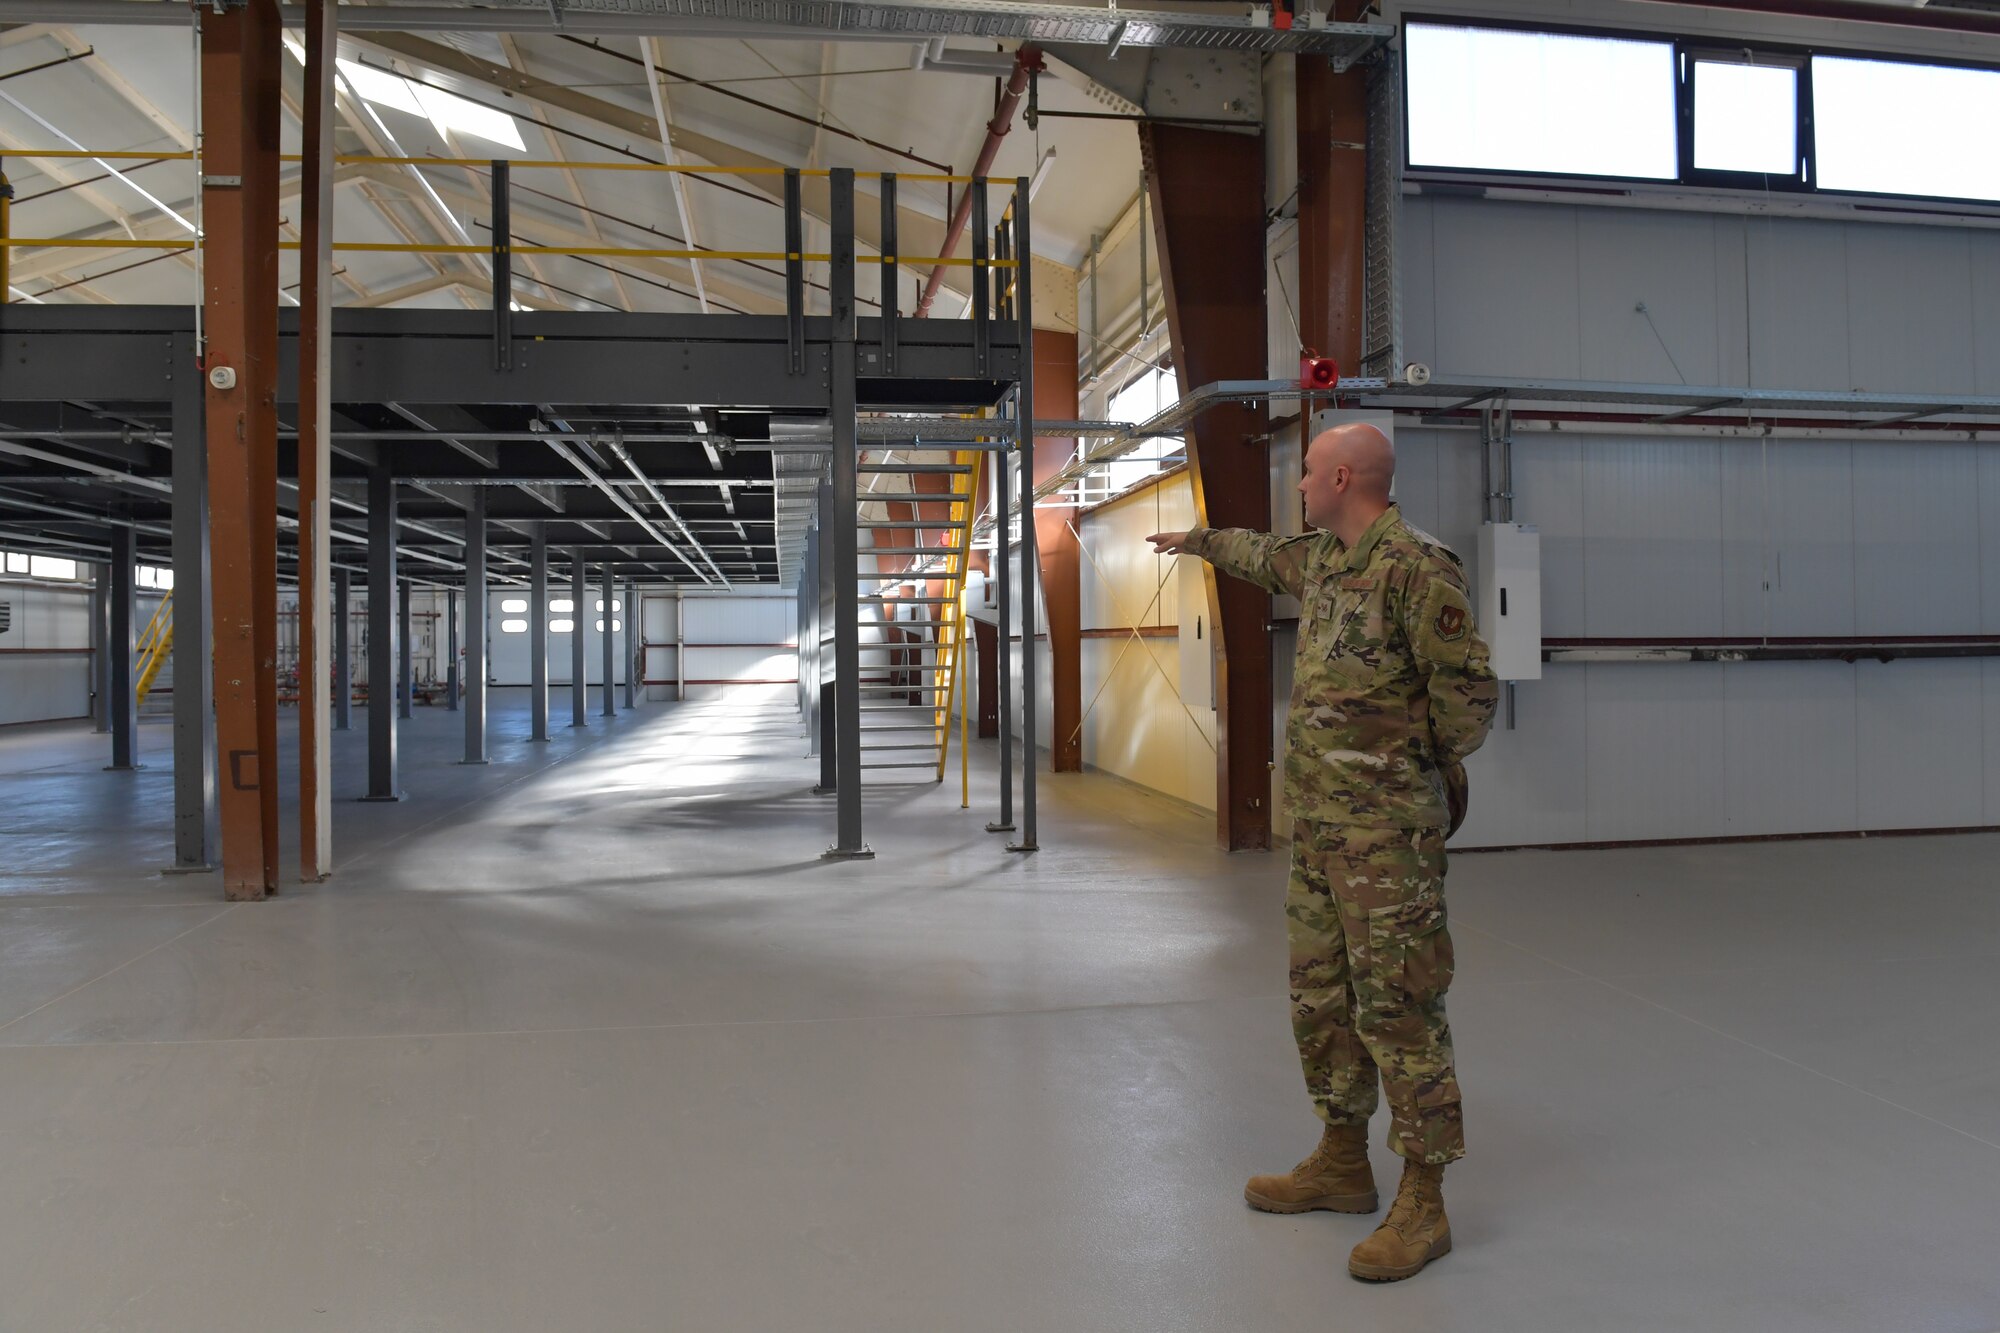 An Airman points to a mezzanine in a maintenance facility.